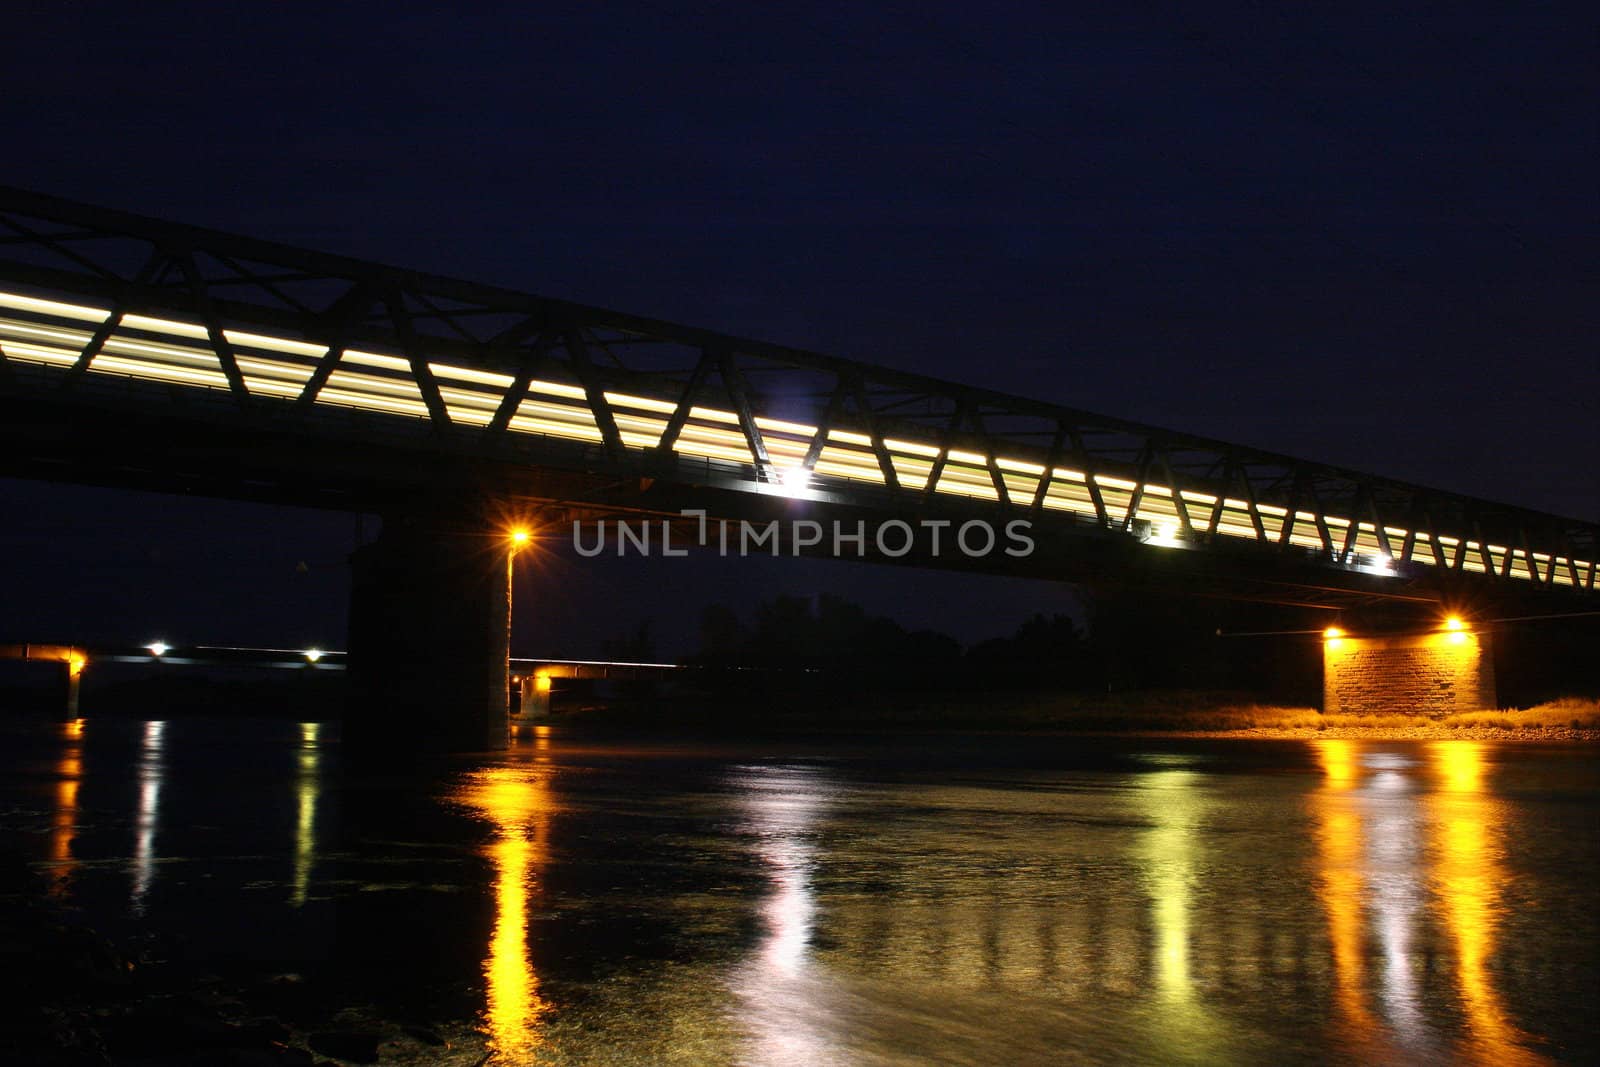 Illuminated railway bridge over the Elbe in Dessau - Rosslau, in Saxony-Anhalt / Germany, with a moving train